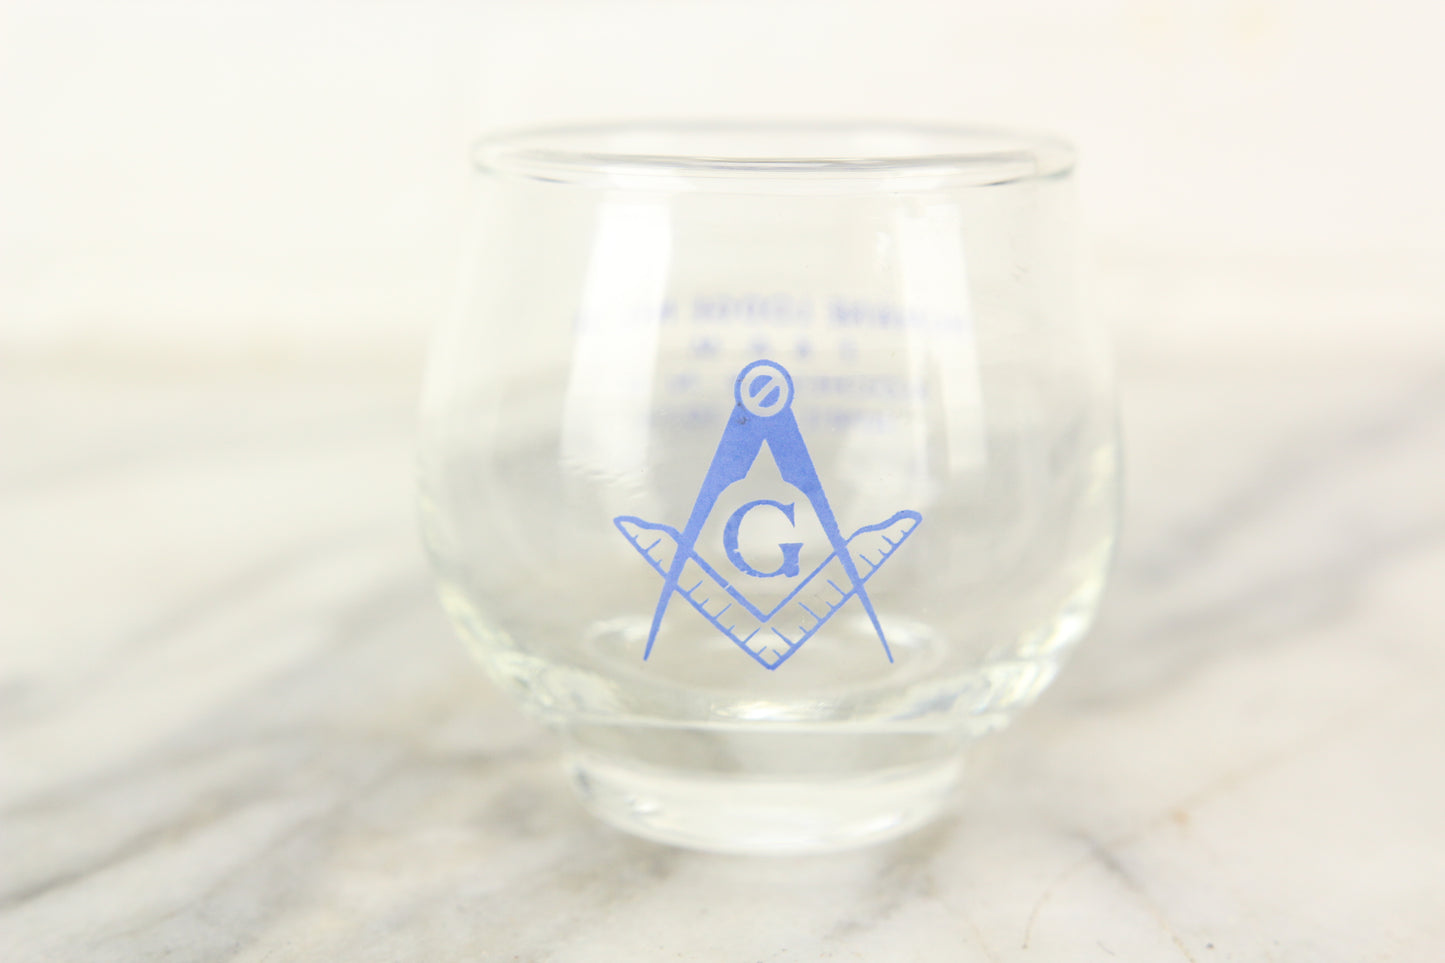 Freemasons Humane Lodge Glass Drinking Cups, Dated 1975, Rochester, NH, Set of 4